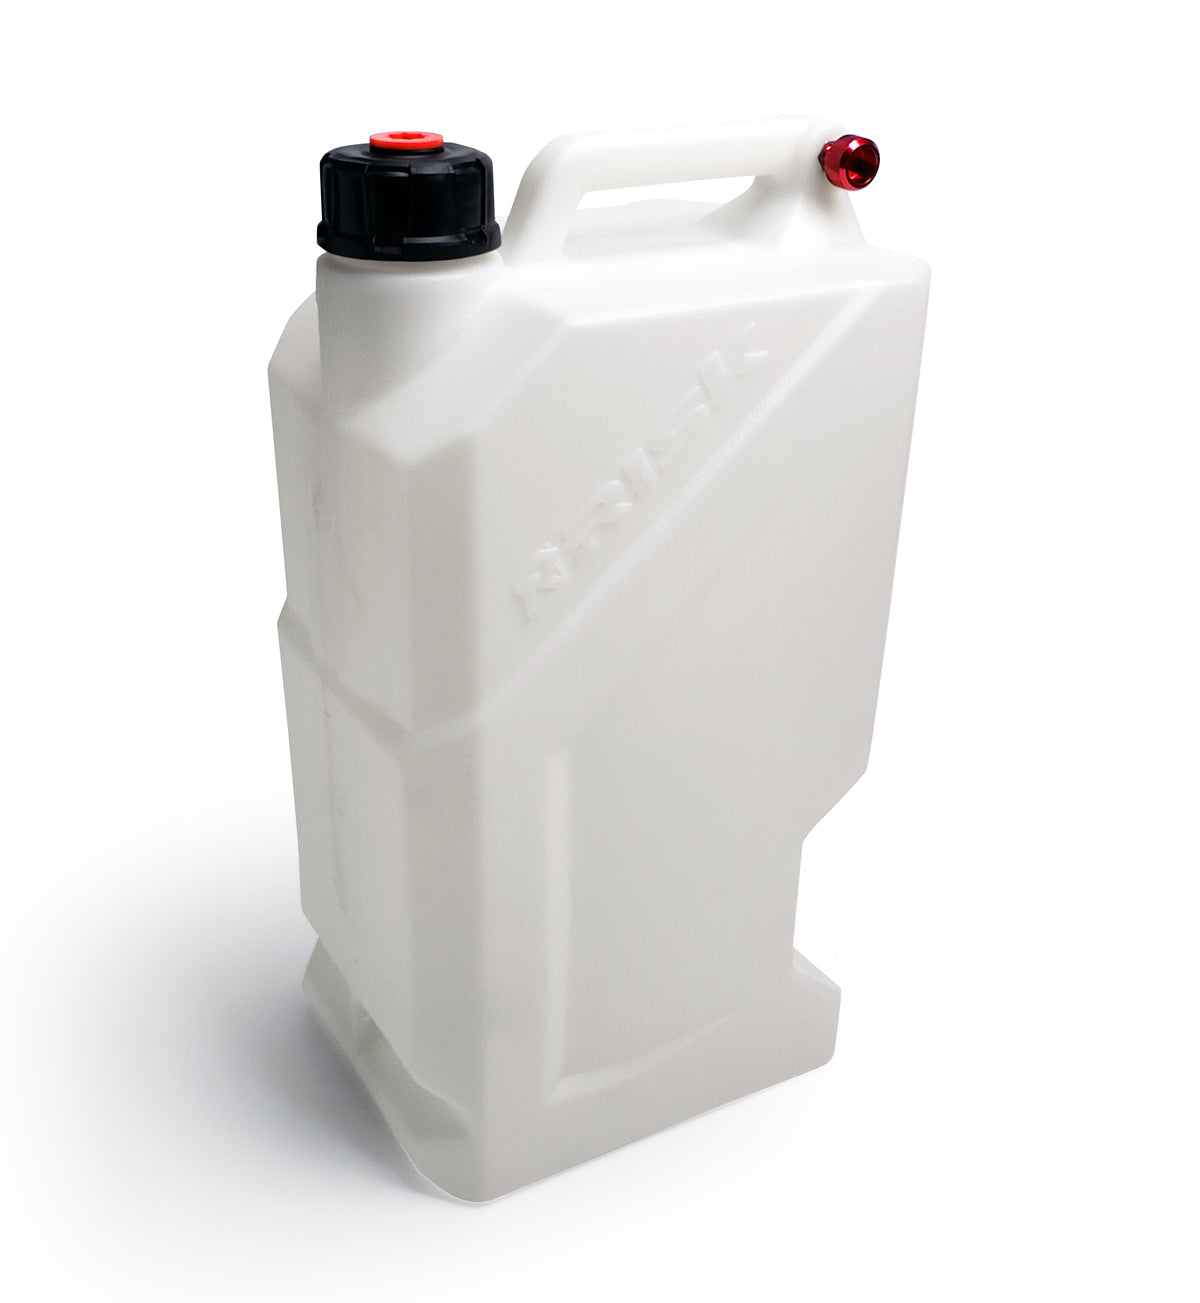 STKR Concepts 3 Gallon Liquid Storage Container available at TreadHeadGarage